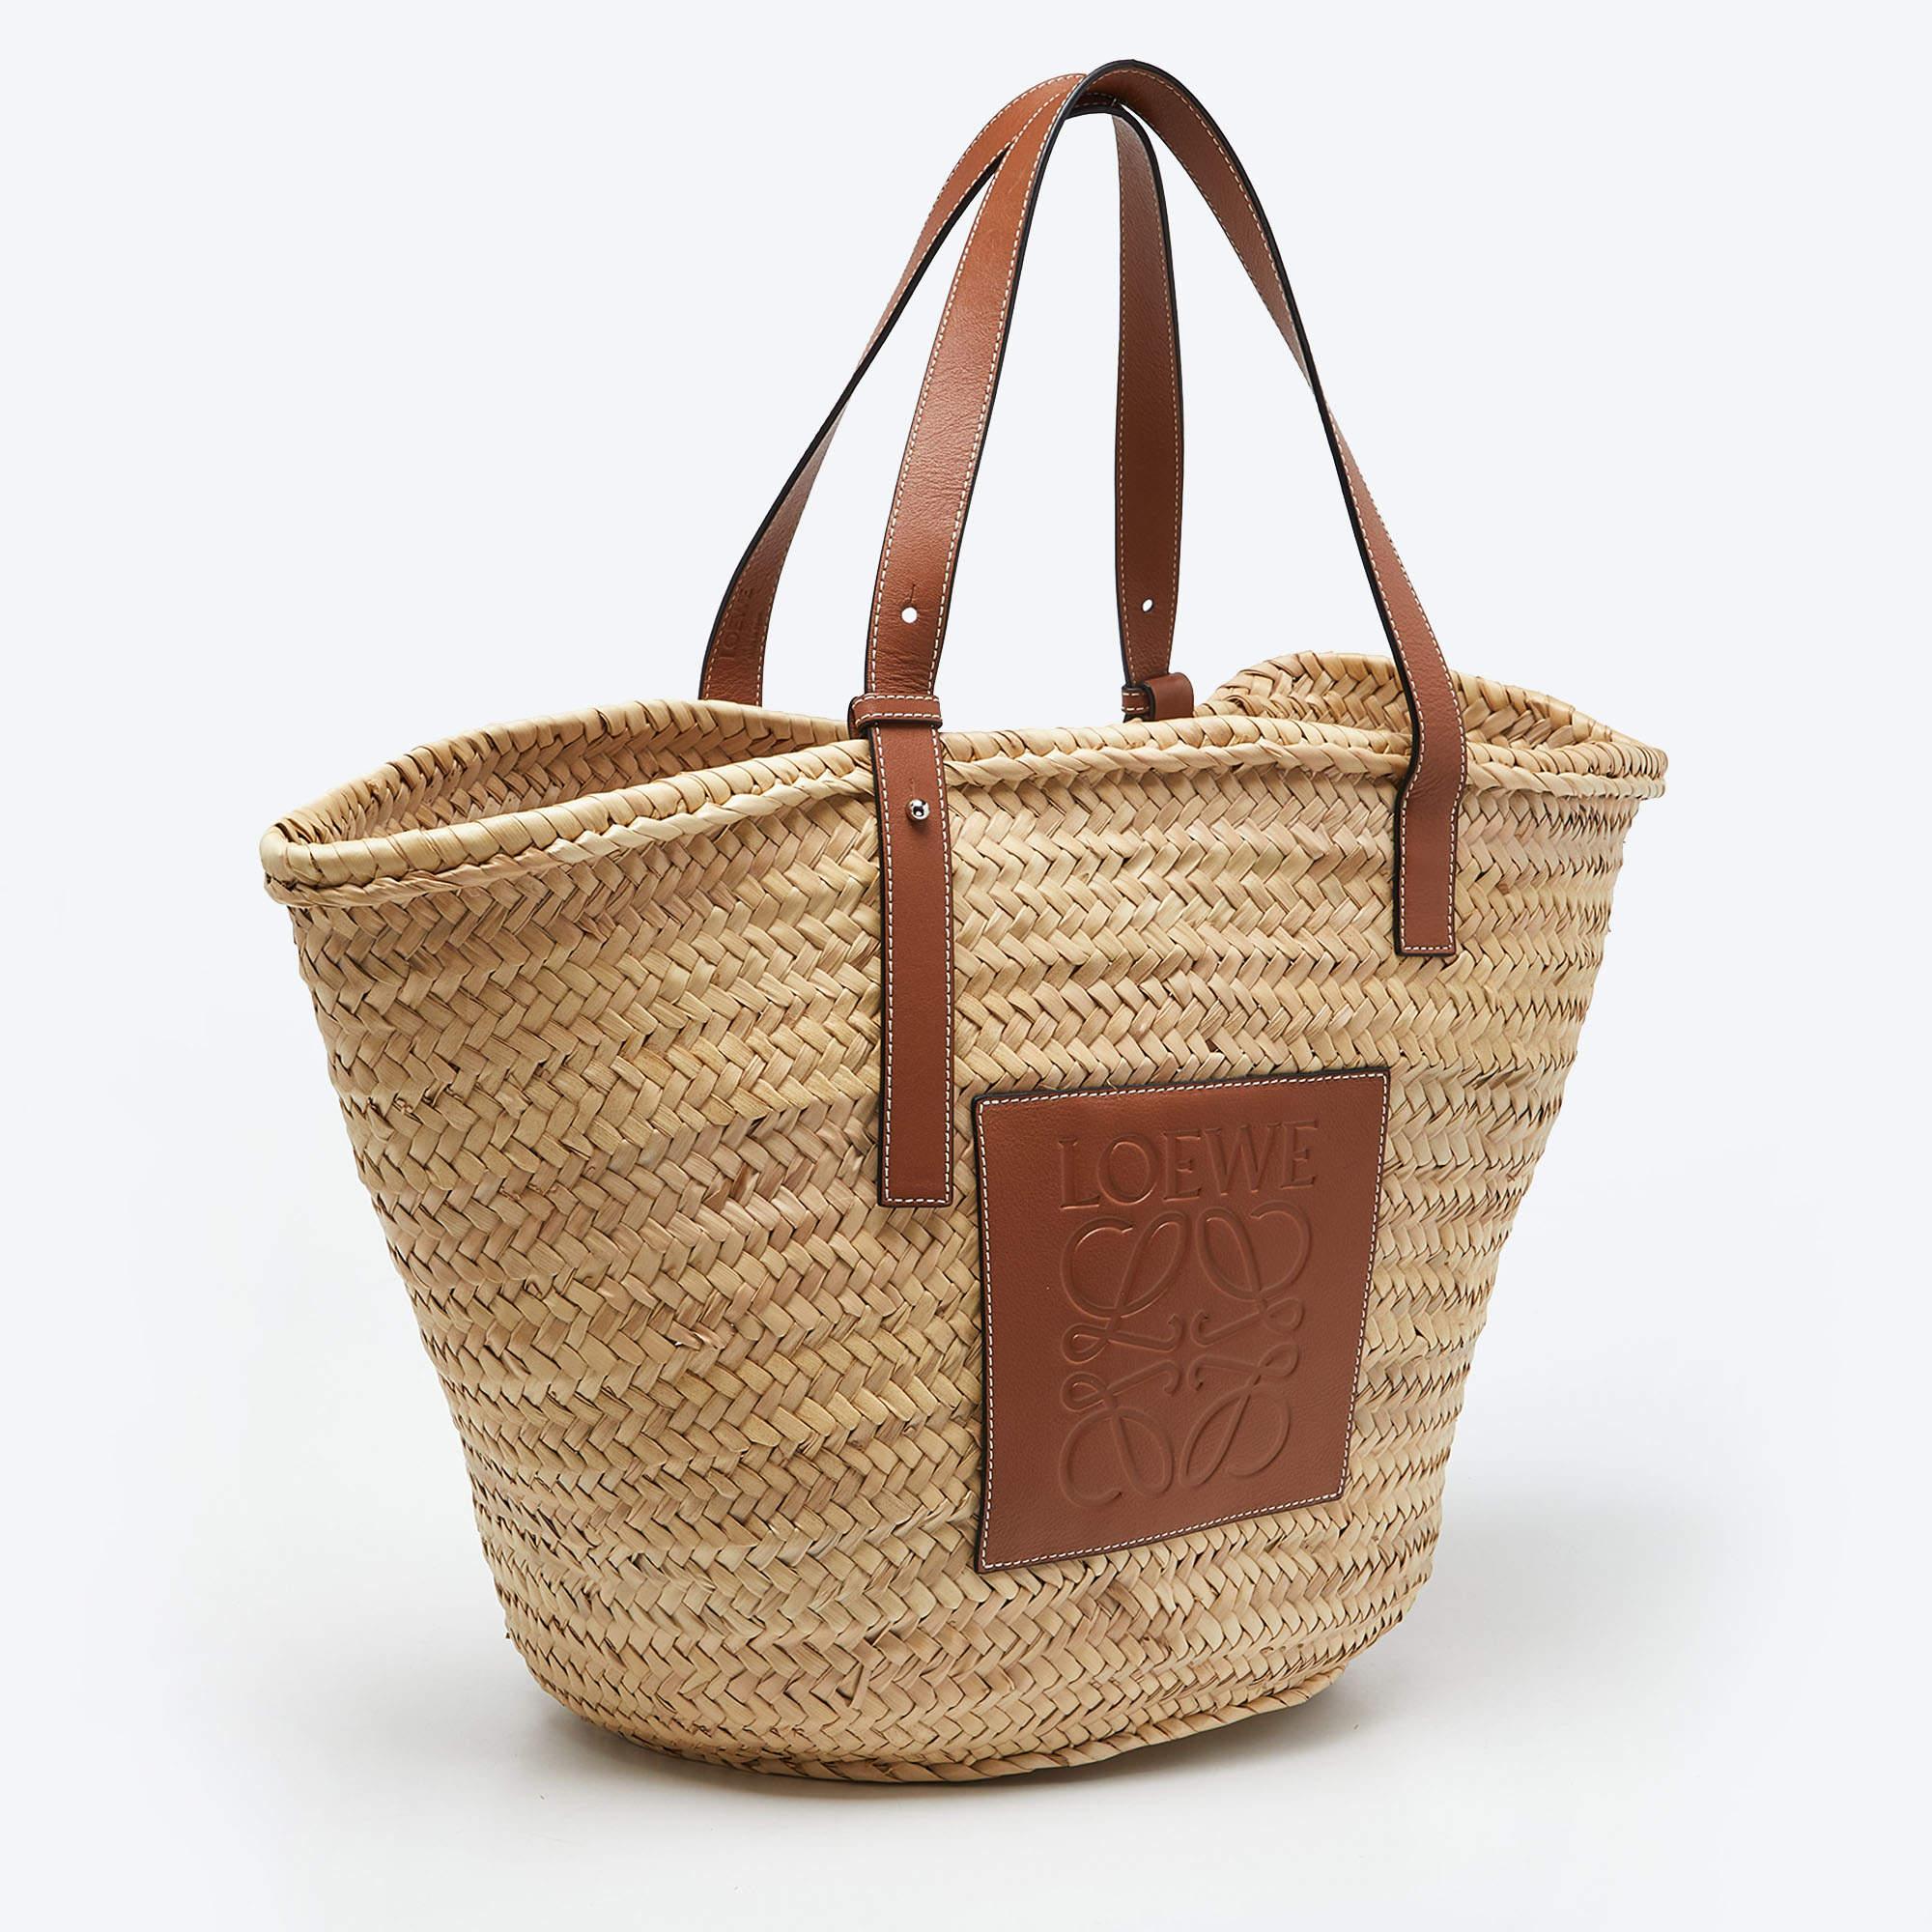 Women's Loewe Vream/Brown Woven Raffia and Leather Large Basket Bag